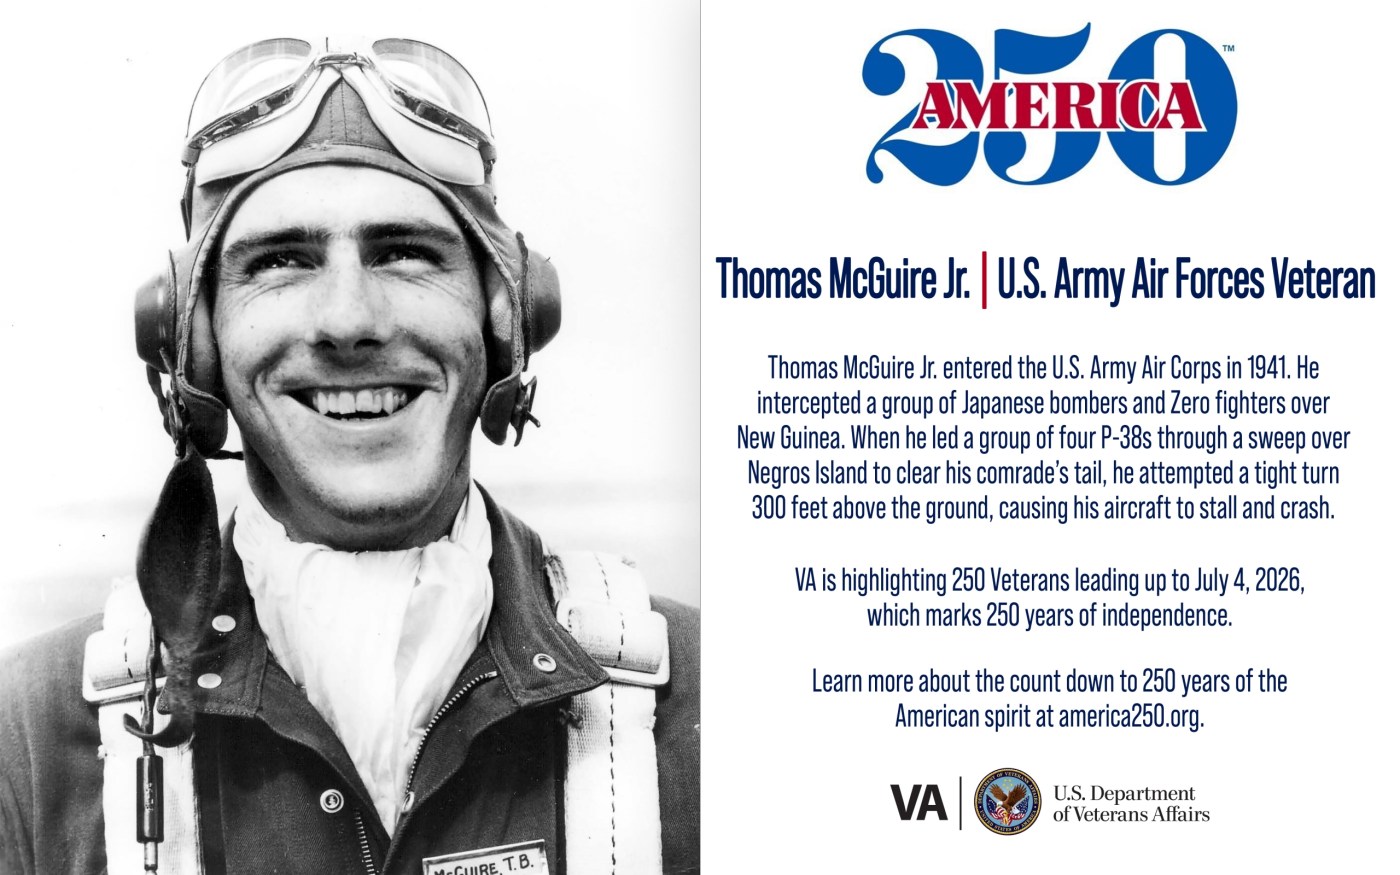 This week’s America250 salute is Army Air Forces Veteran Thomas McGuire Jr., who was one of the two highest-scoring aces in American military history.